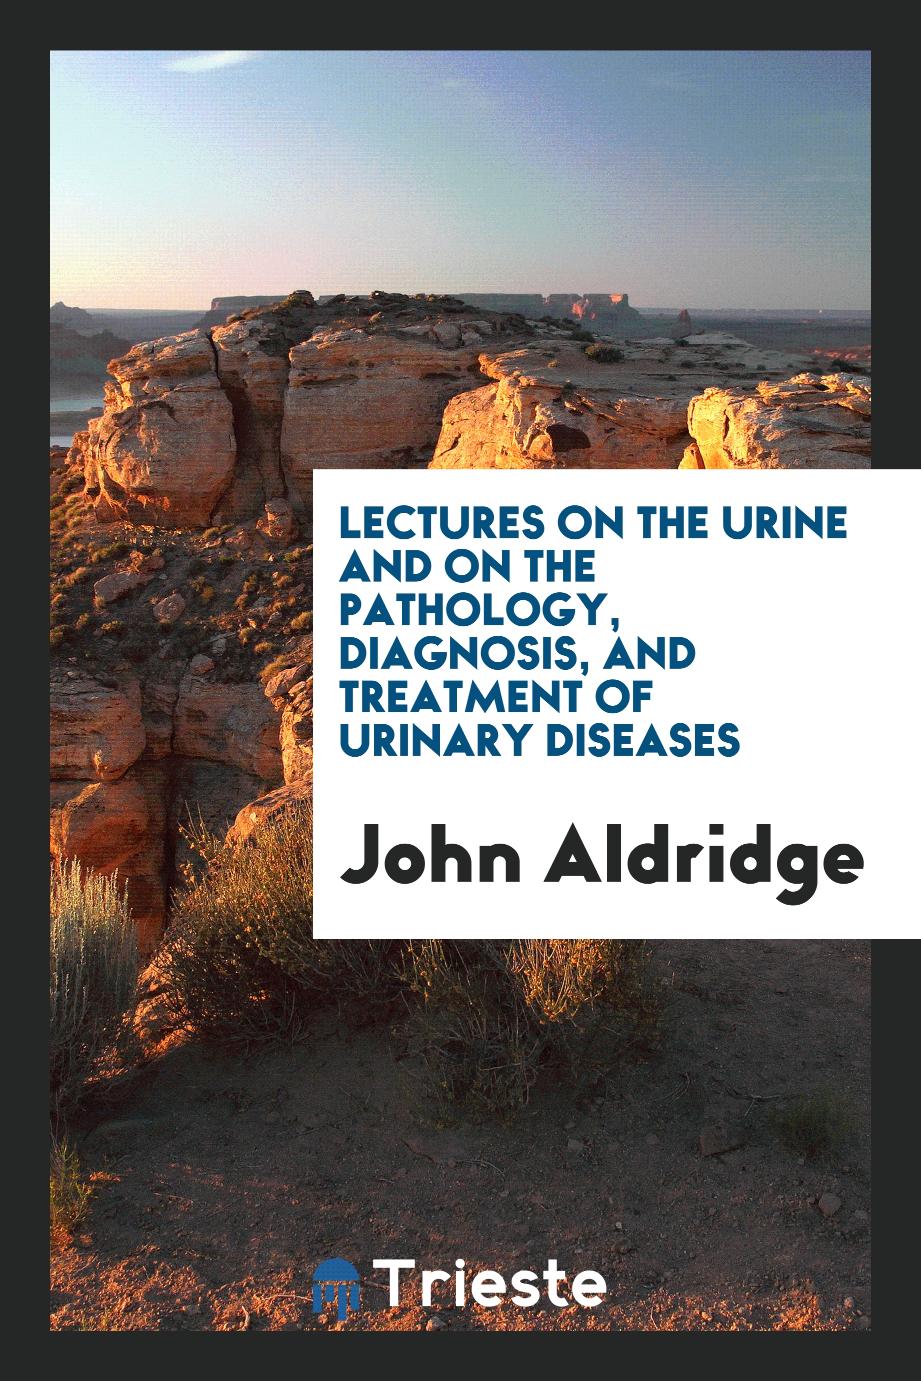 Lectures on the urine and on the pathology, diagnosis, and treatment of urinary diseases